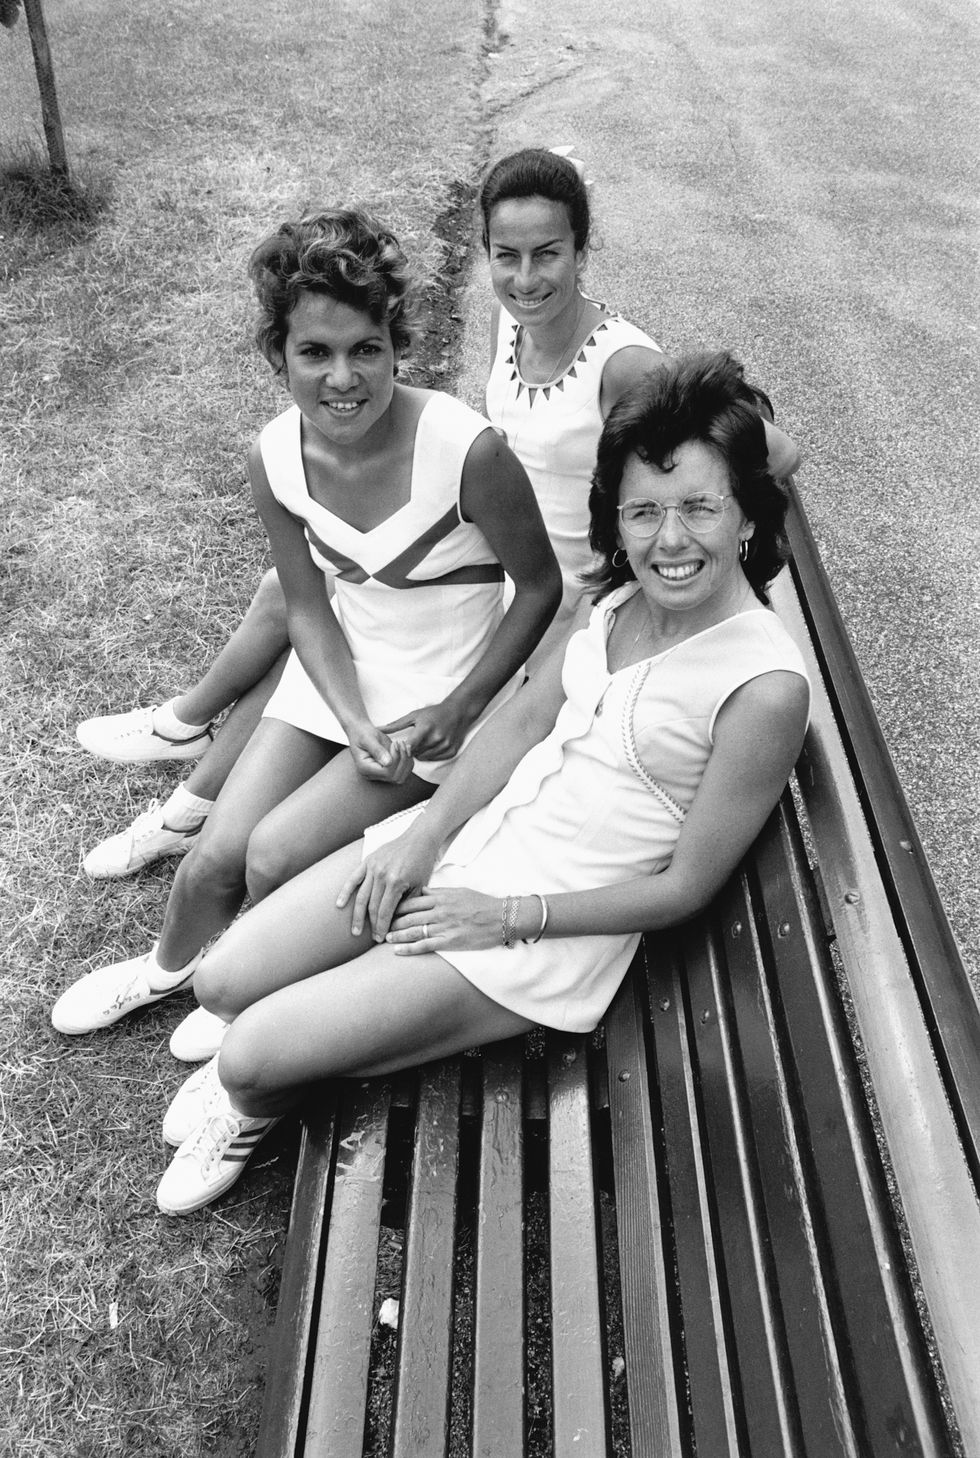 Billie Jean King, Yvonne Goolagong, and Virginia Wade, seated on a bench at the Wimbledon tennis club. (Photo by © Hulton-Deutsch Collection/CORBIS/Corbis via Getty Images)